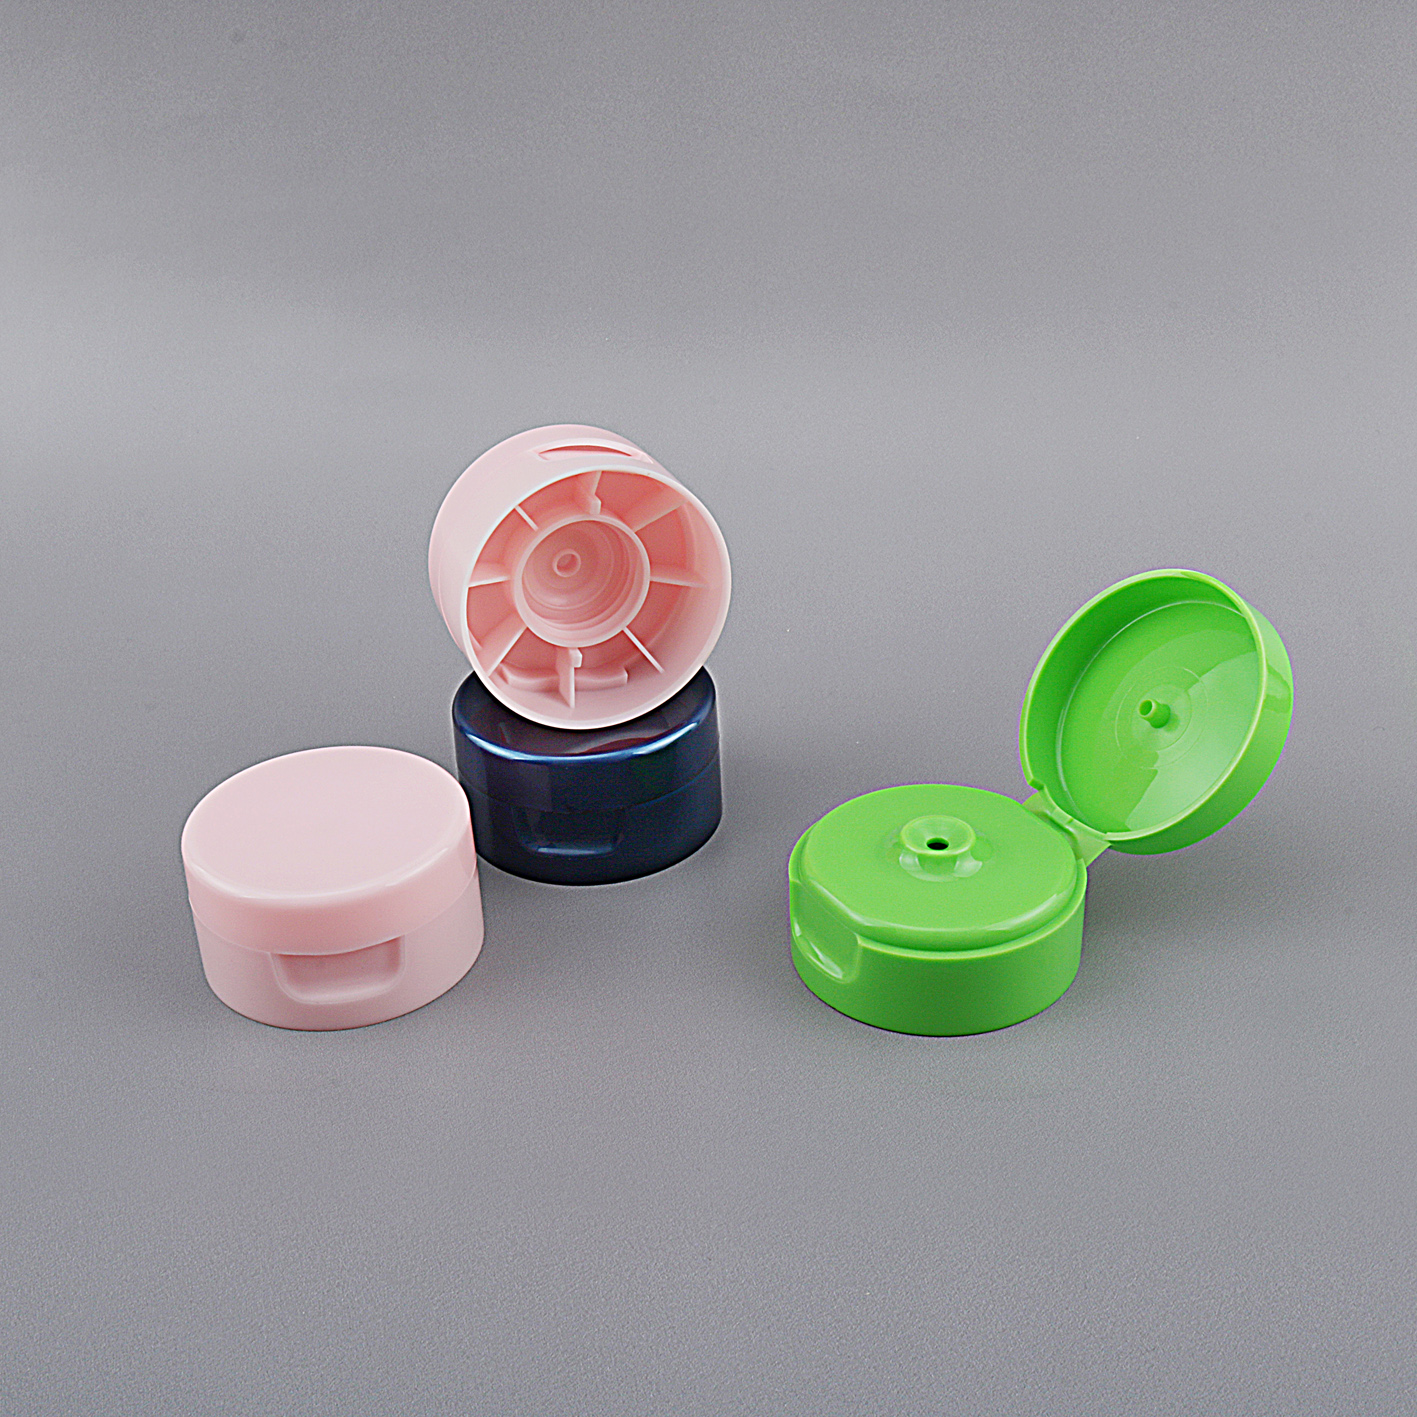 50mm_Diameter_Customized_Shampoo_Tubes_with_Glossy_Flip_Top_Caps3